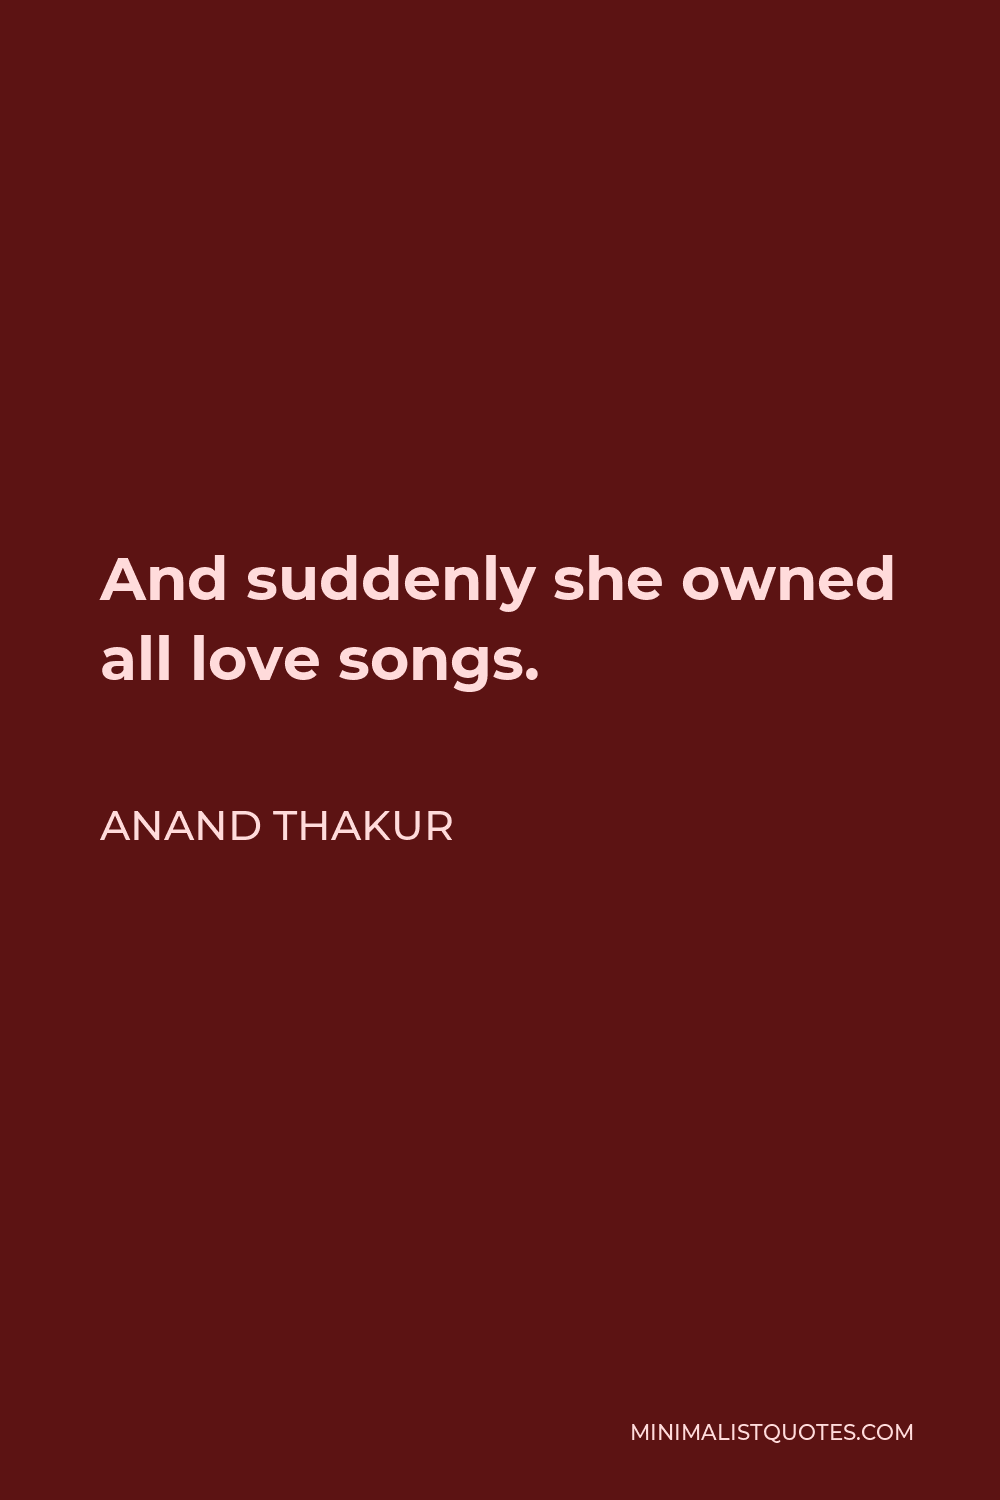 Anand Thakur Quote - And suddenly she owned all love songs.